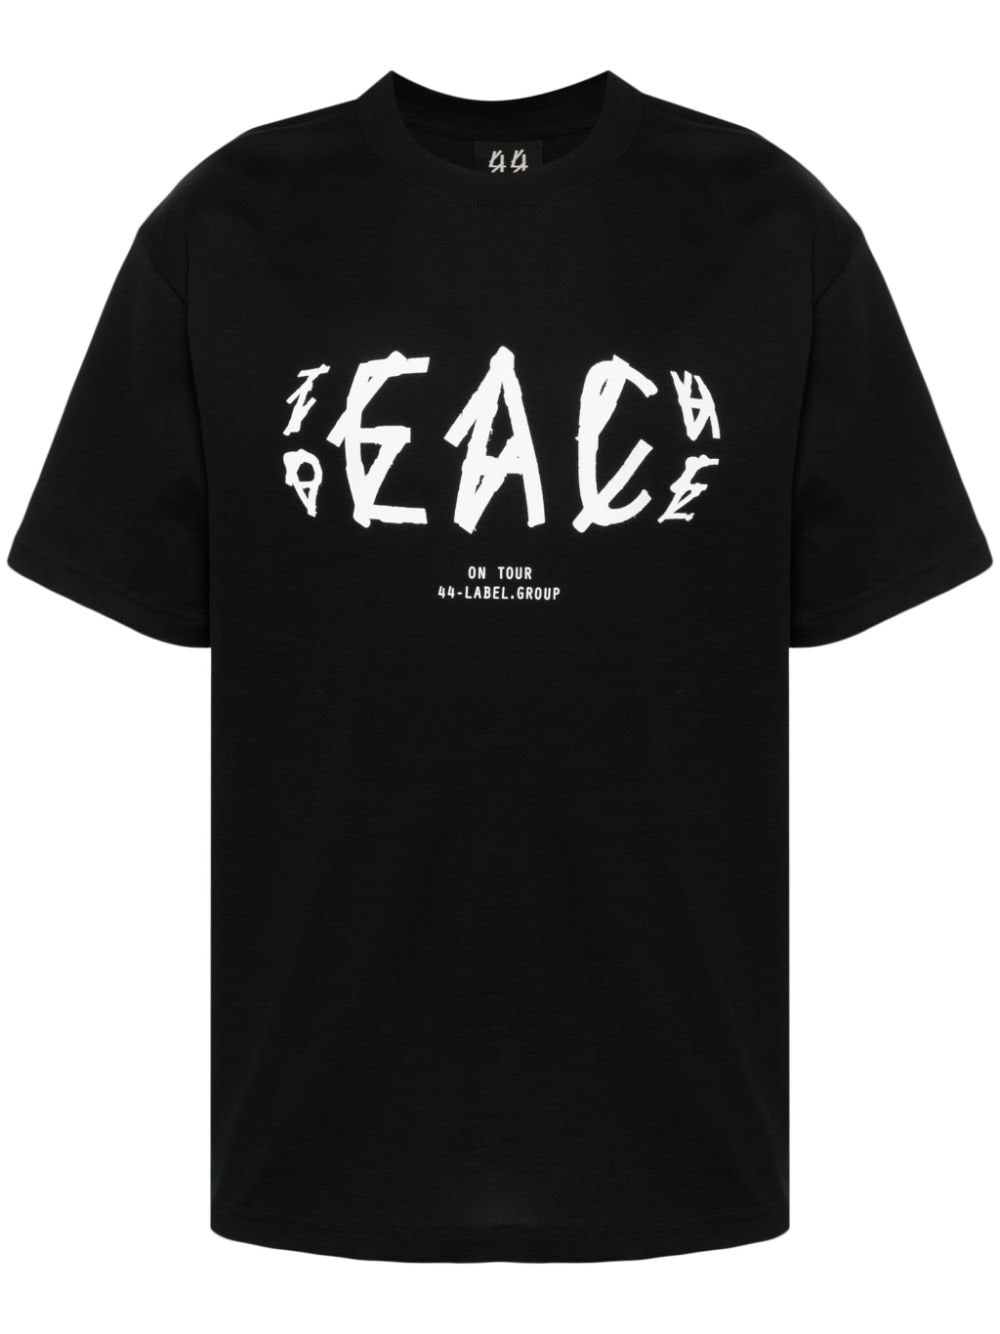 44 Label Group Printed T-shirt In Black